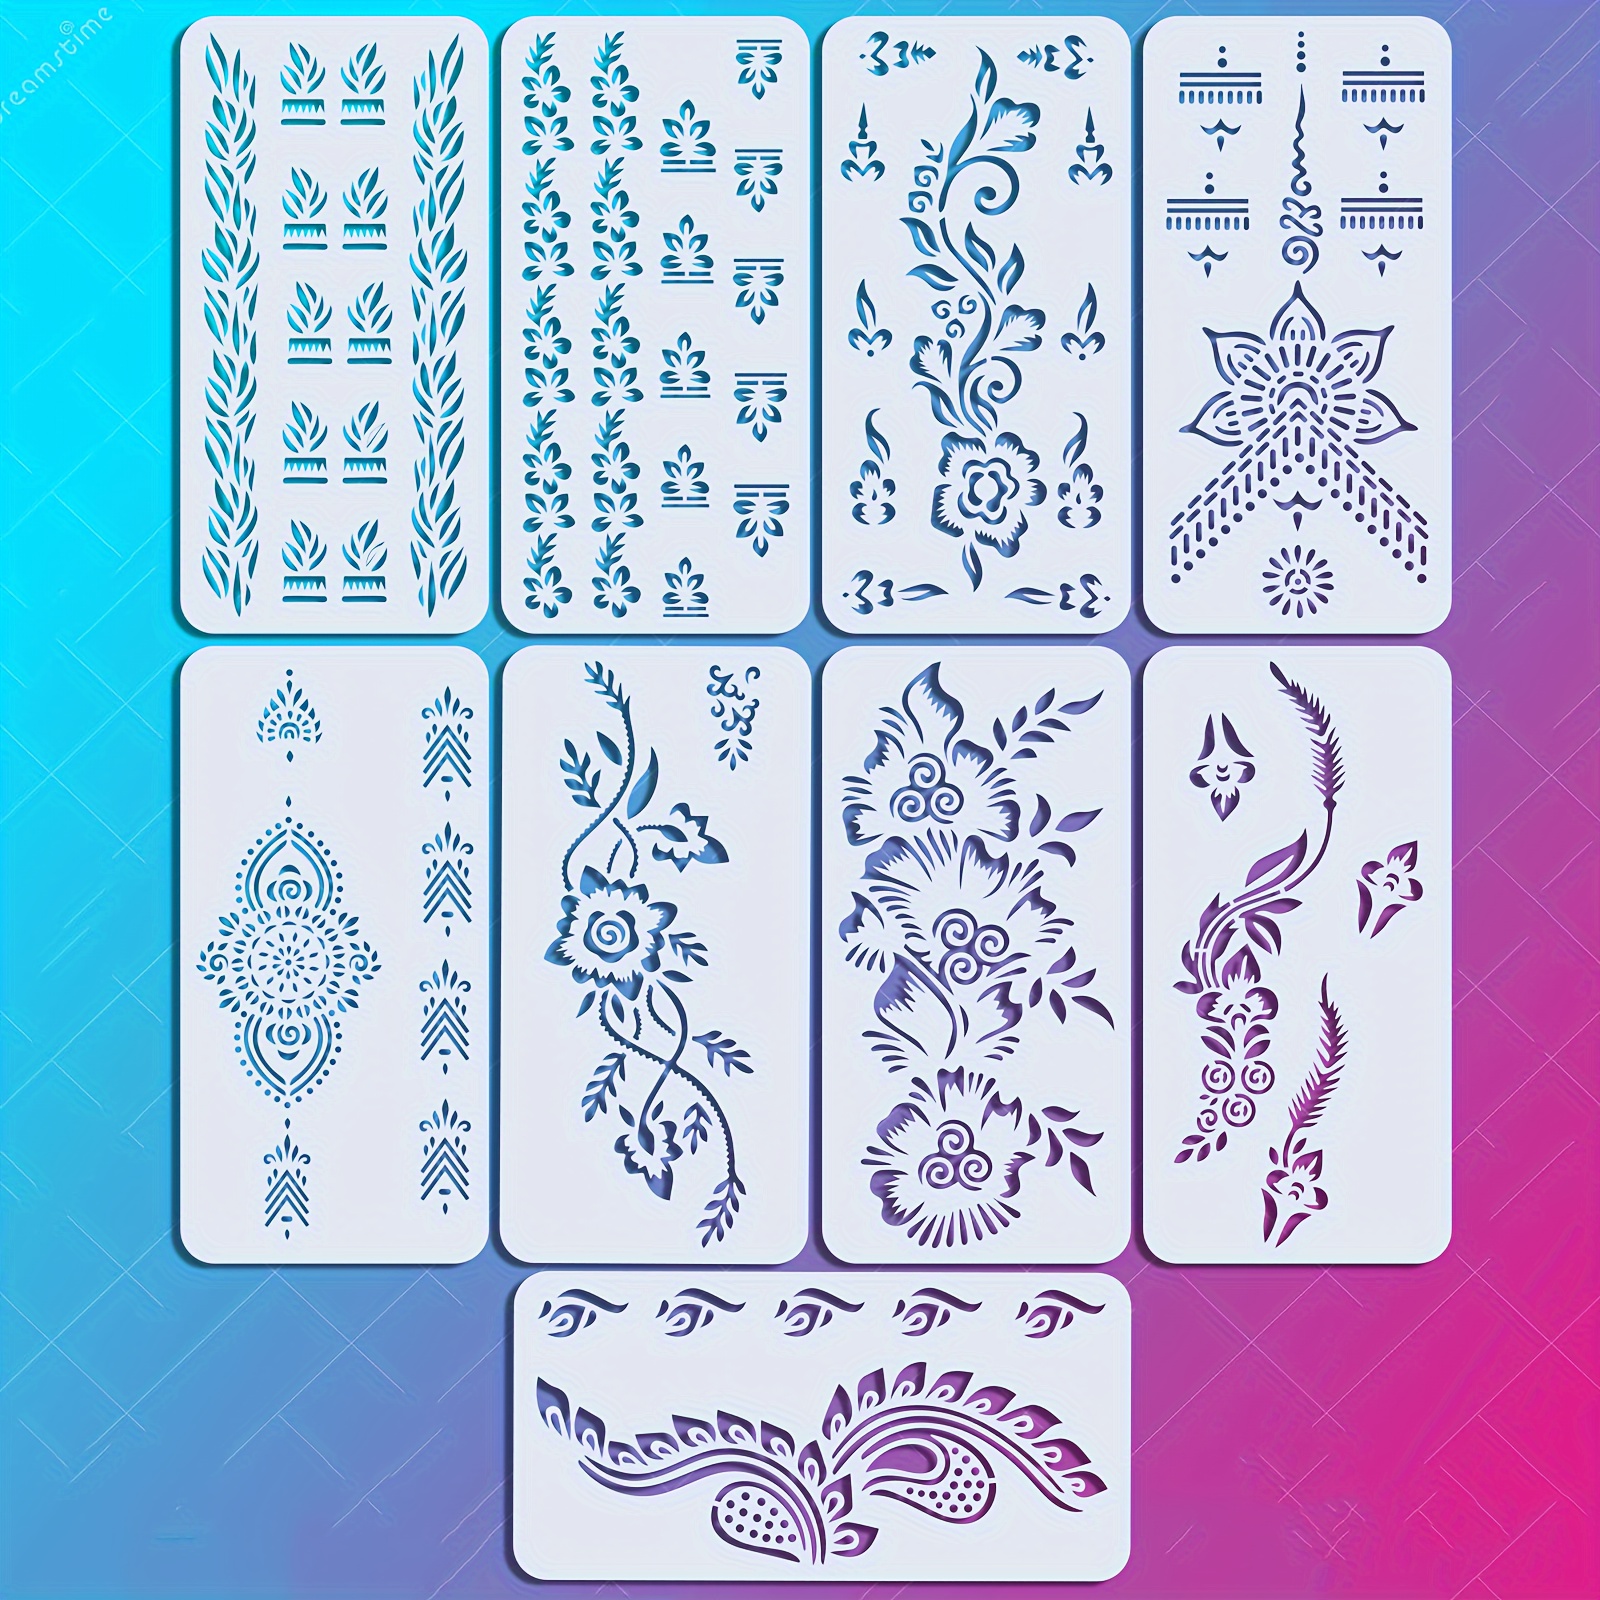 

9-piece Hand & Floral Stencil Set For Diy Body Art - Reusable Templates For Hands, Feet & More, 7.87x2.94 Inches, White Plastic